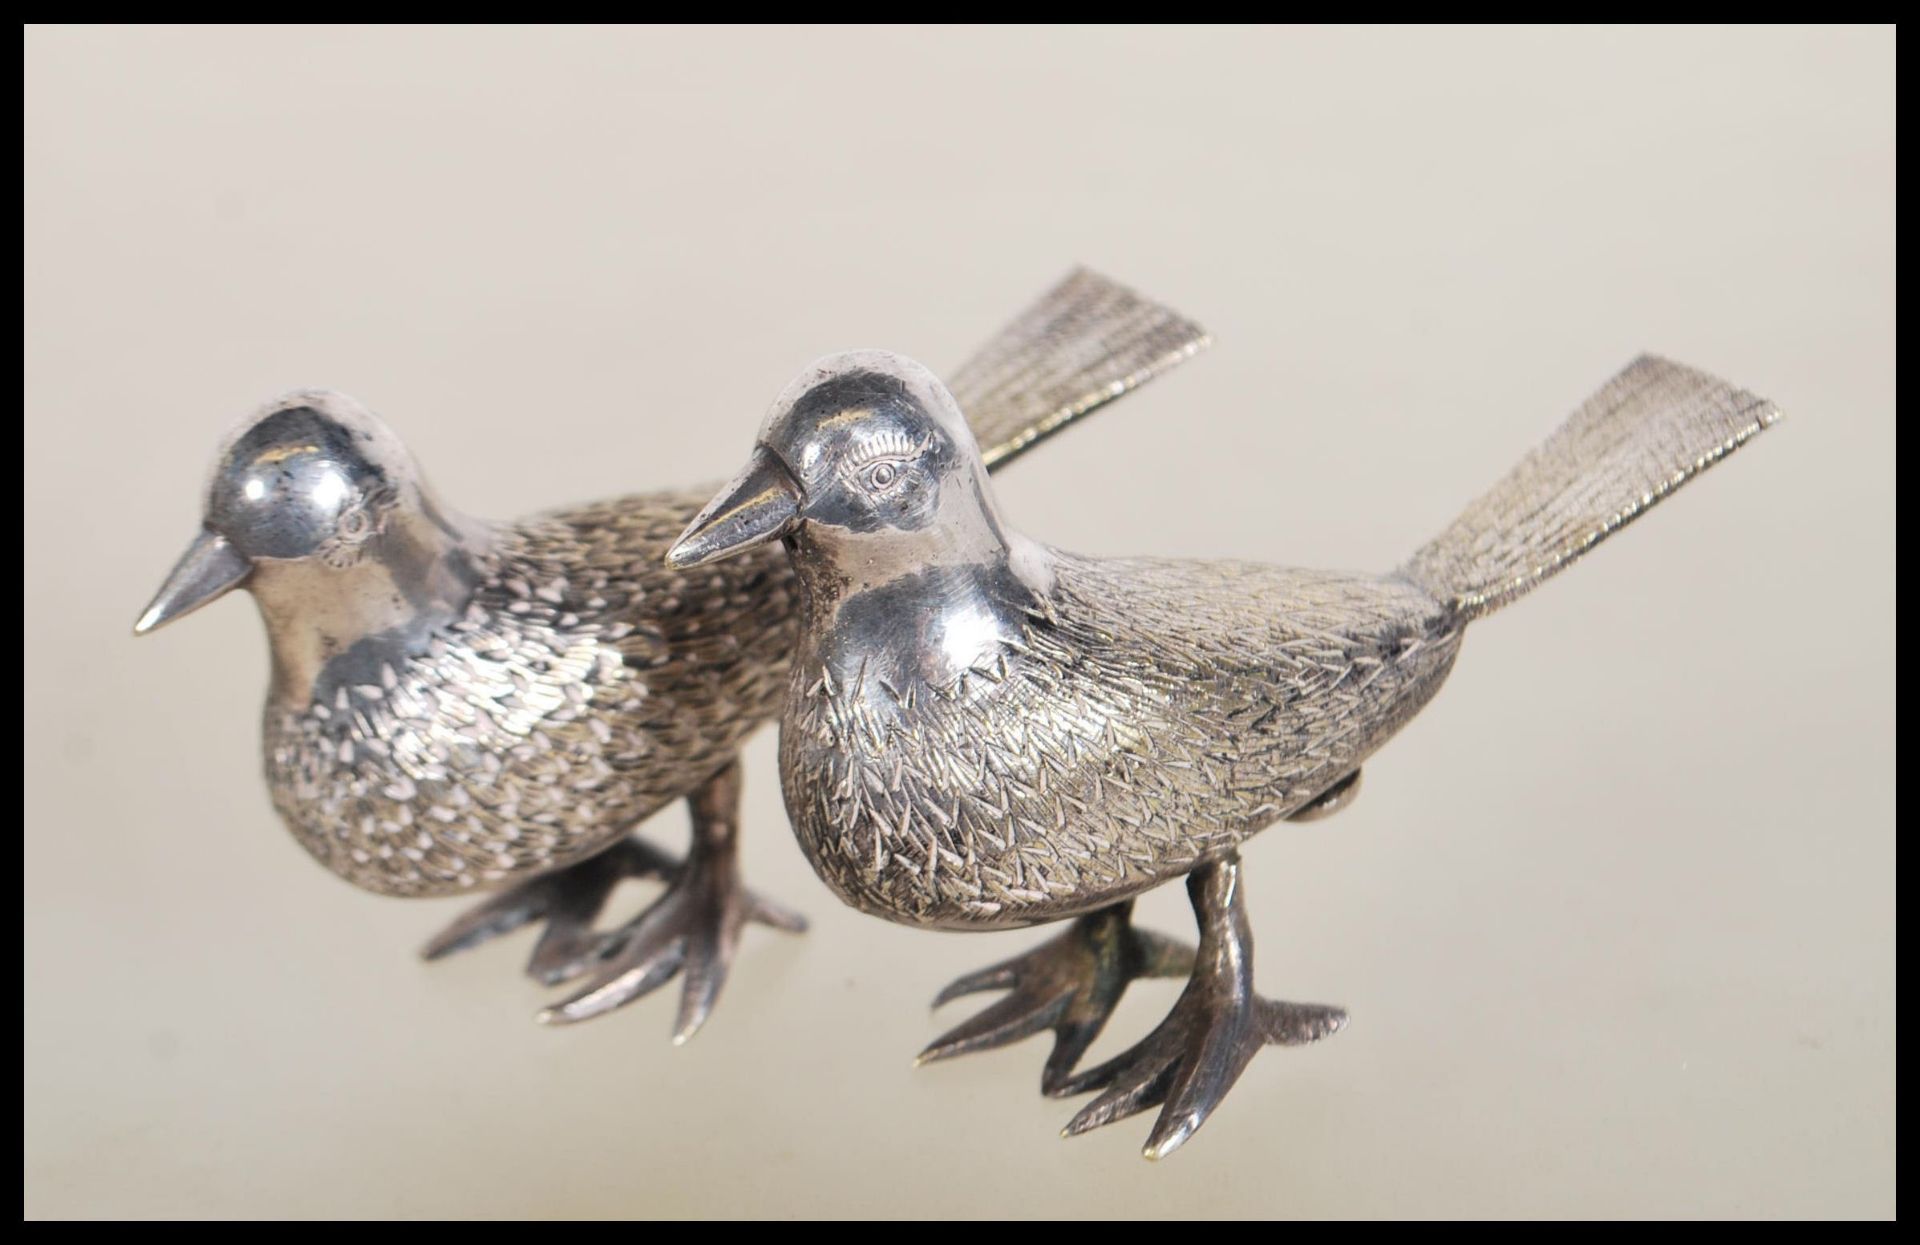 A pair of silver white metal salt and pepper condiments in the form of birds having engraved